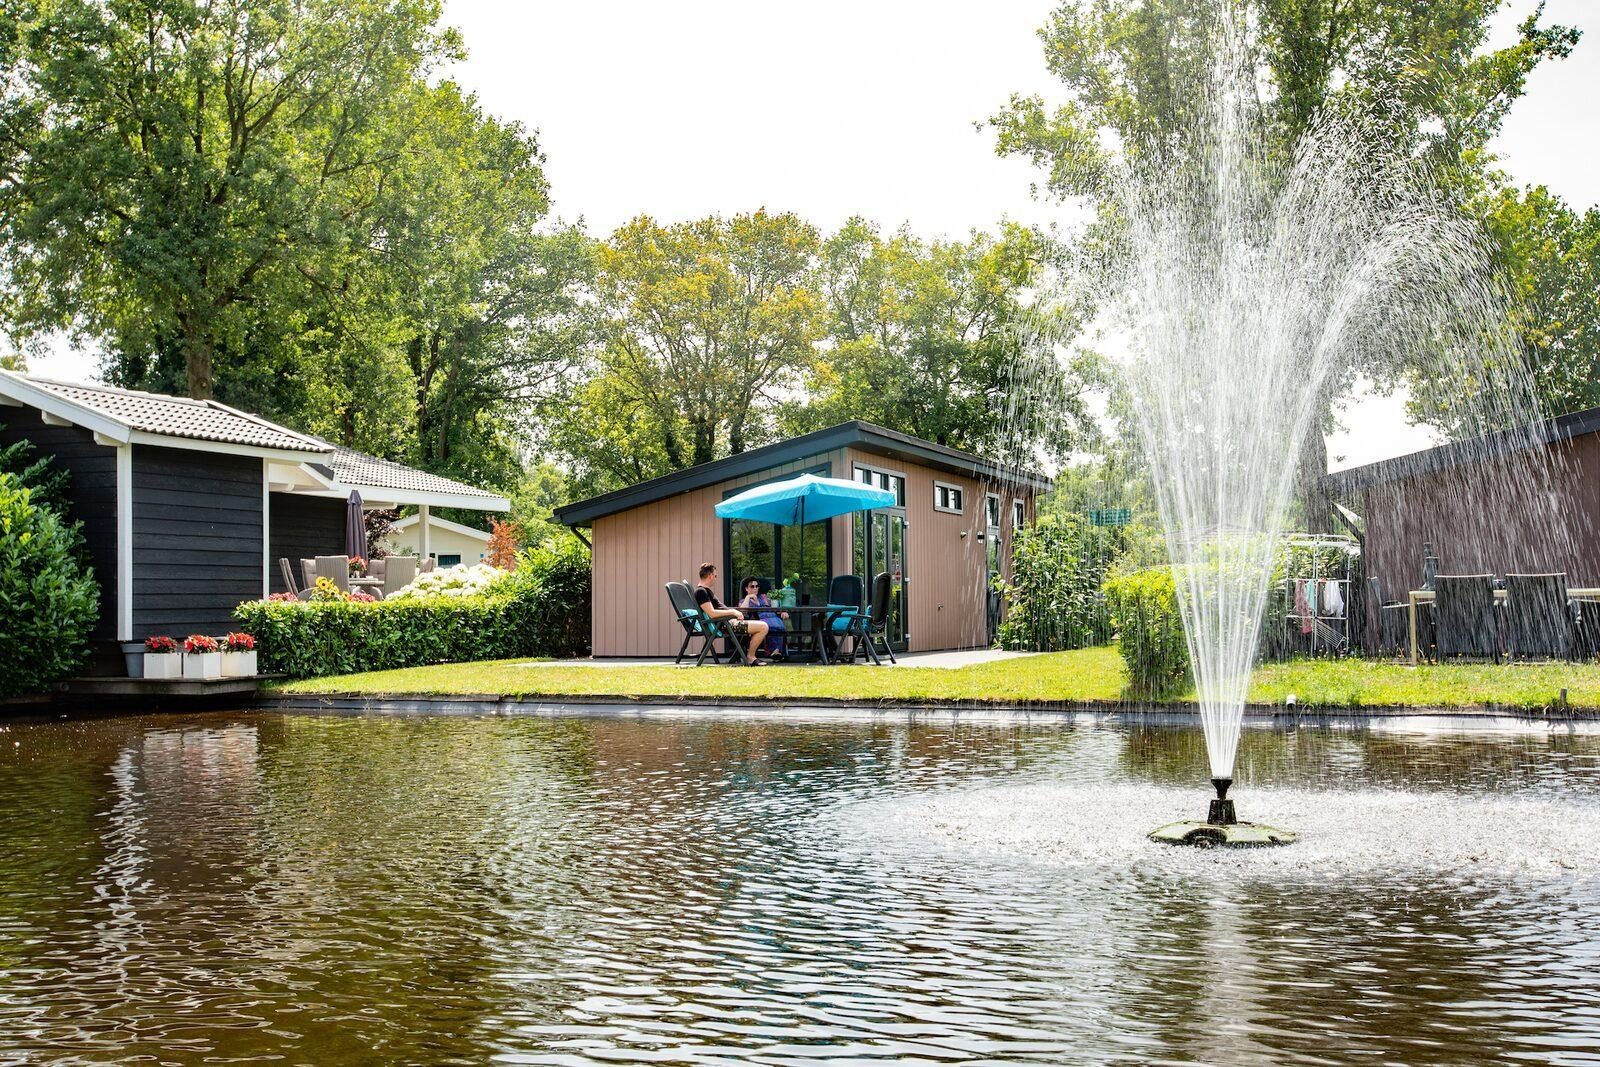 Accessible holiday parks the Netherlands